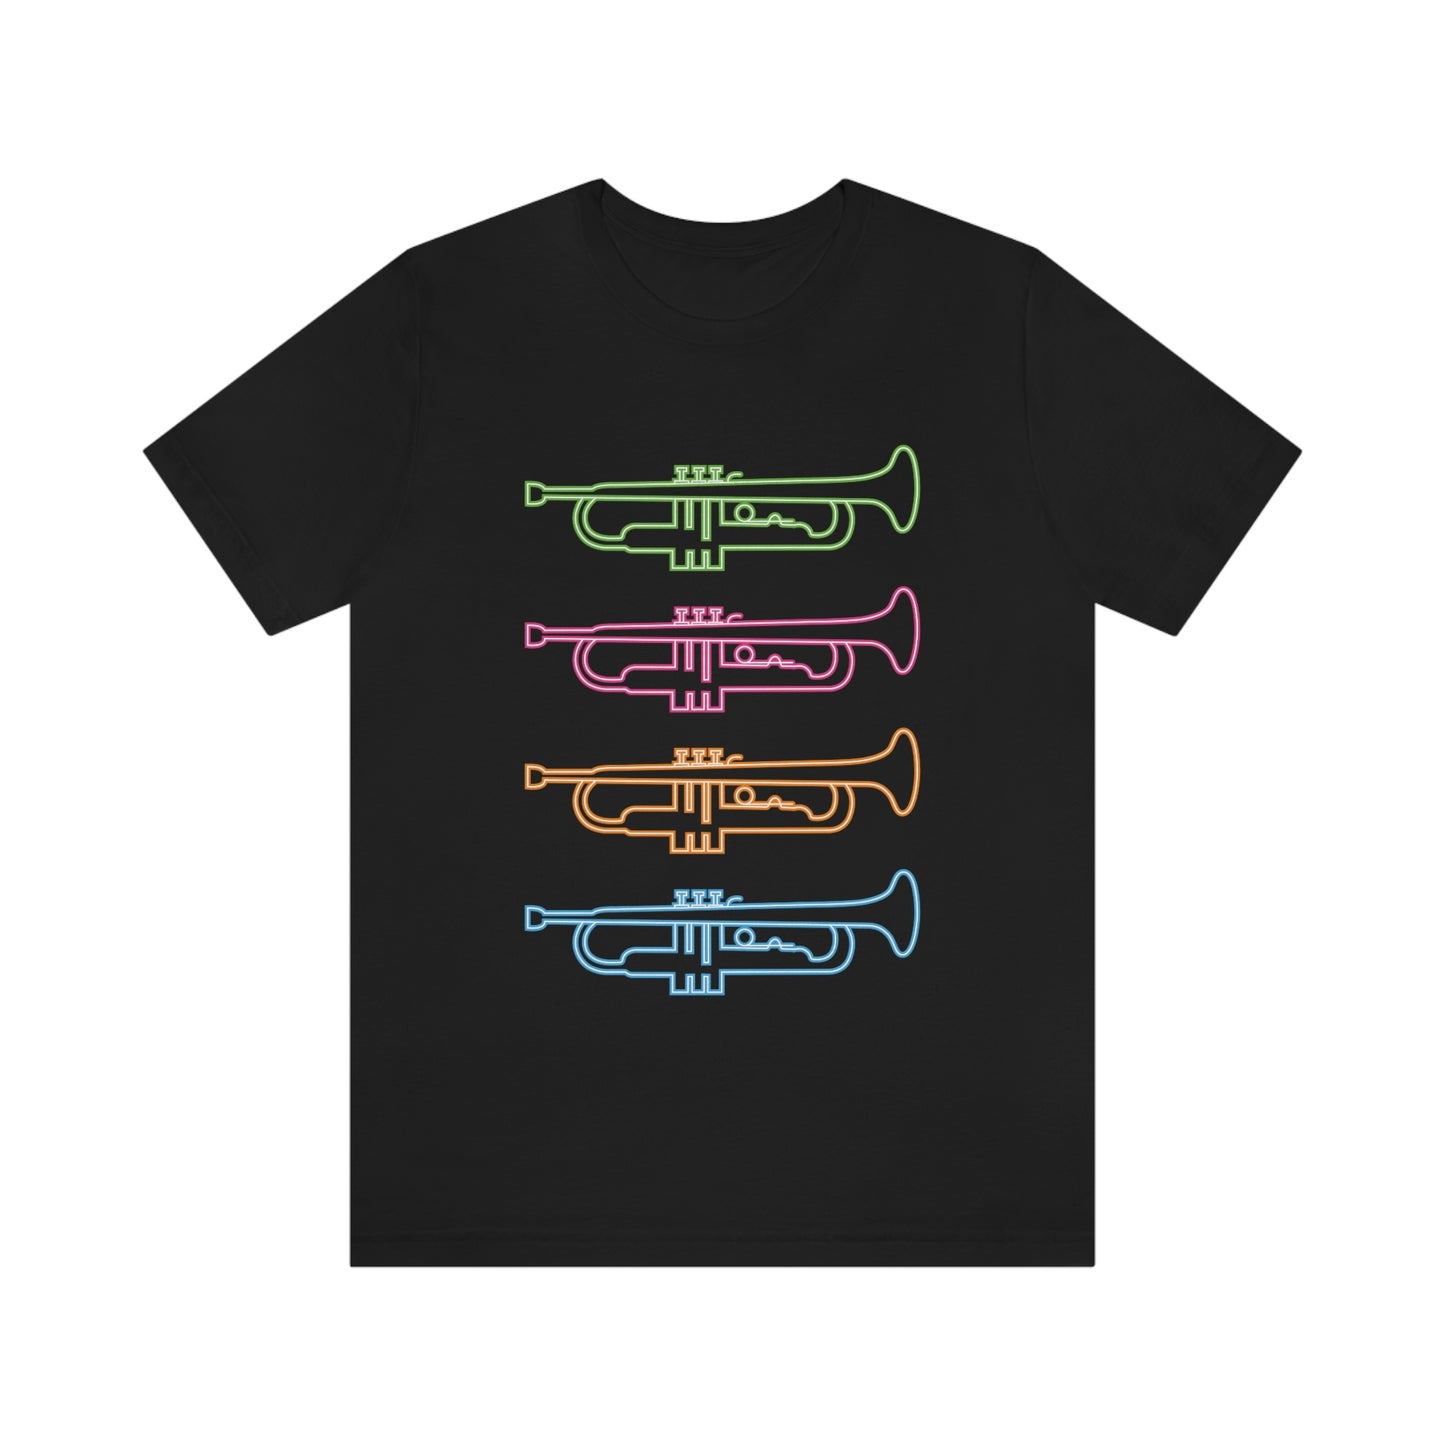 Black T-Shirt with vibrant mutli-coloured stacked trumpets neon design. Taken from the TEQNEON Music Box collection